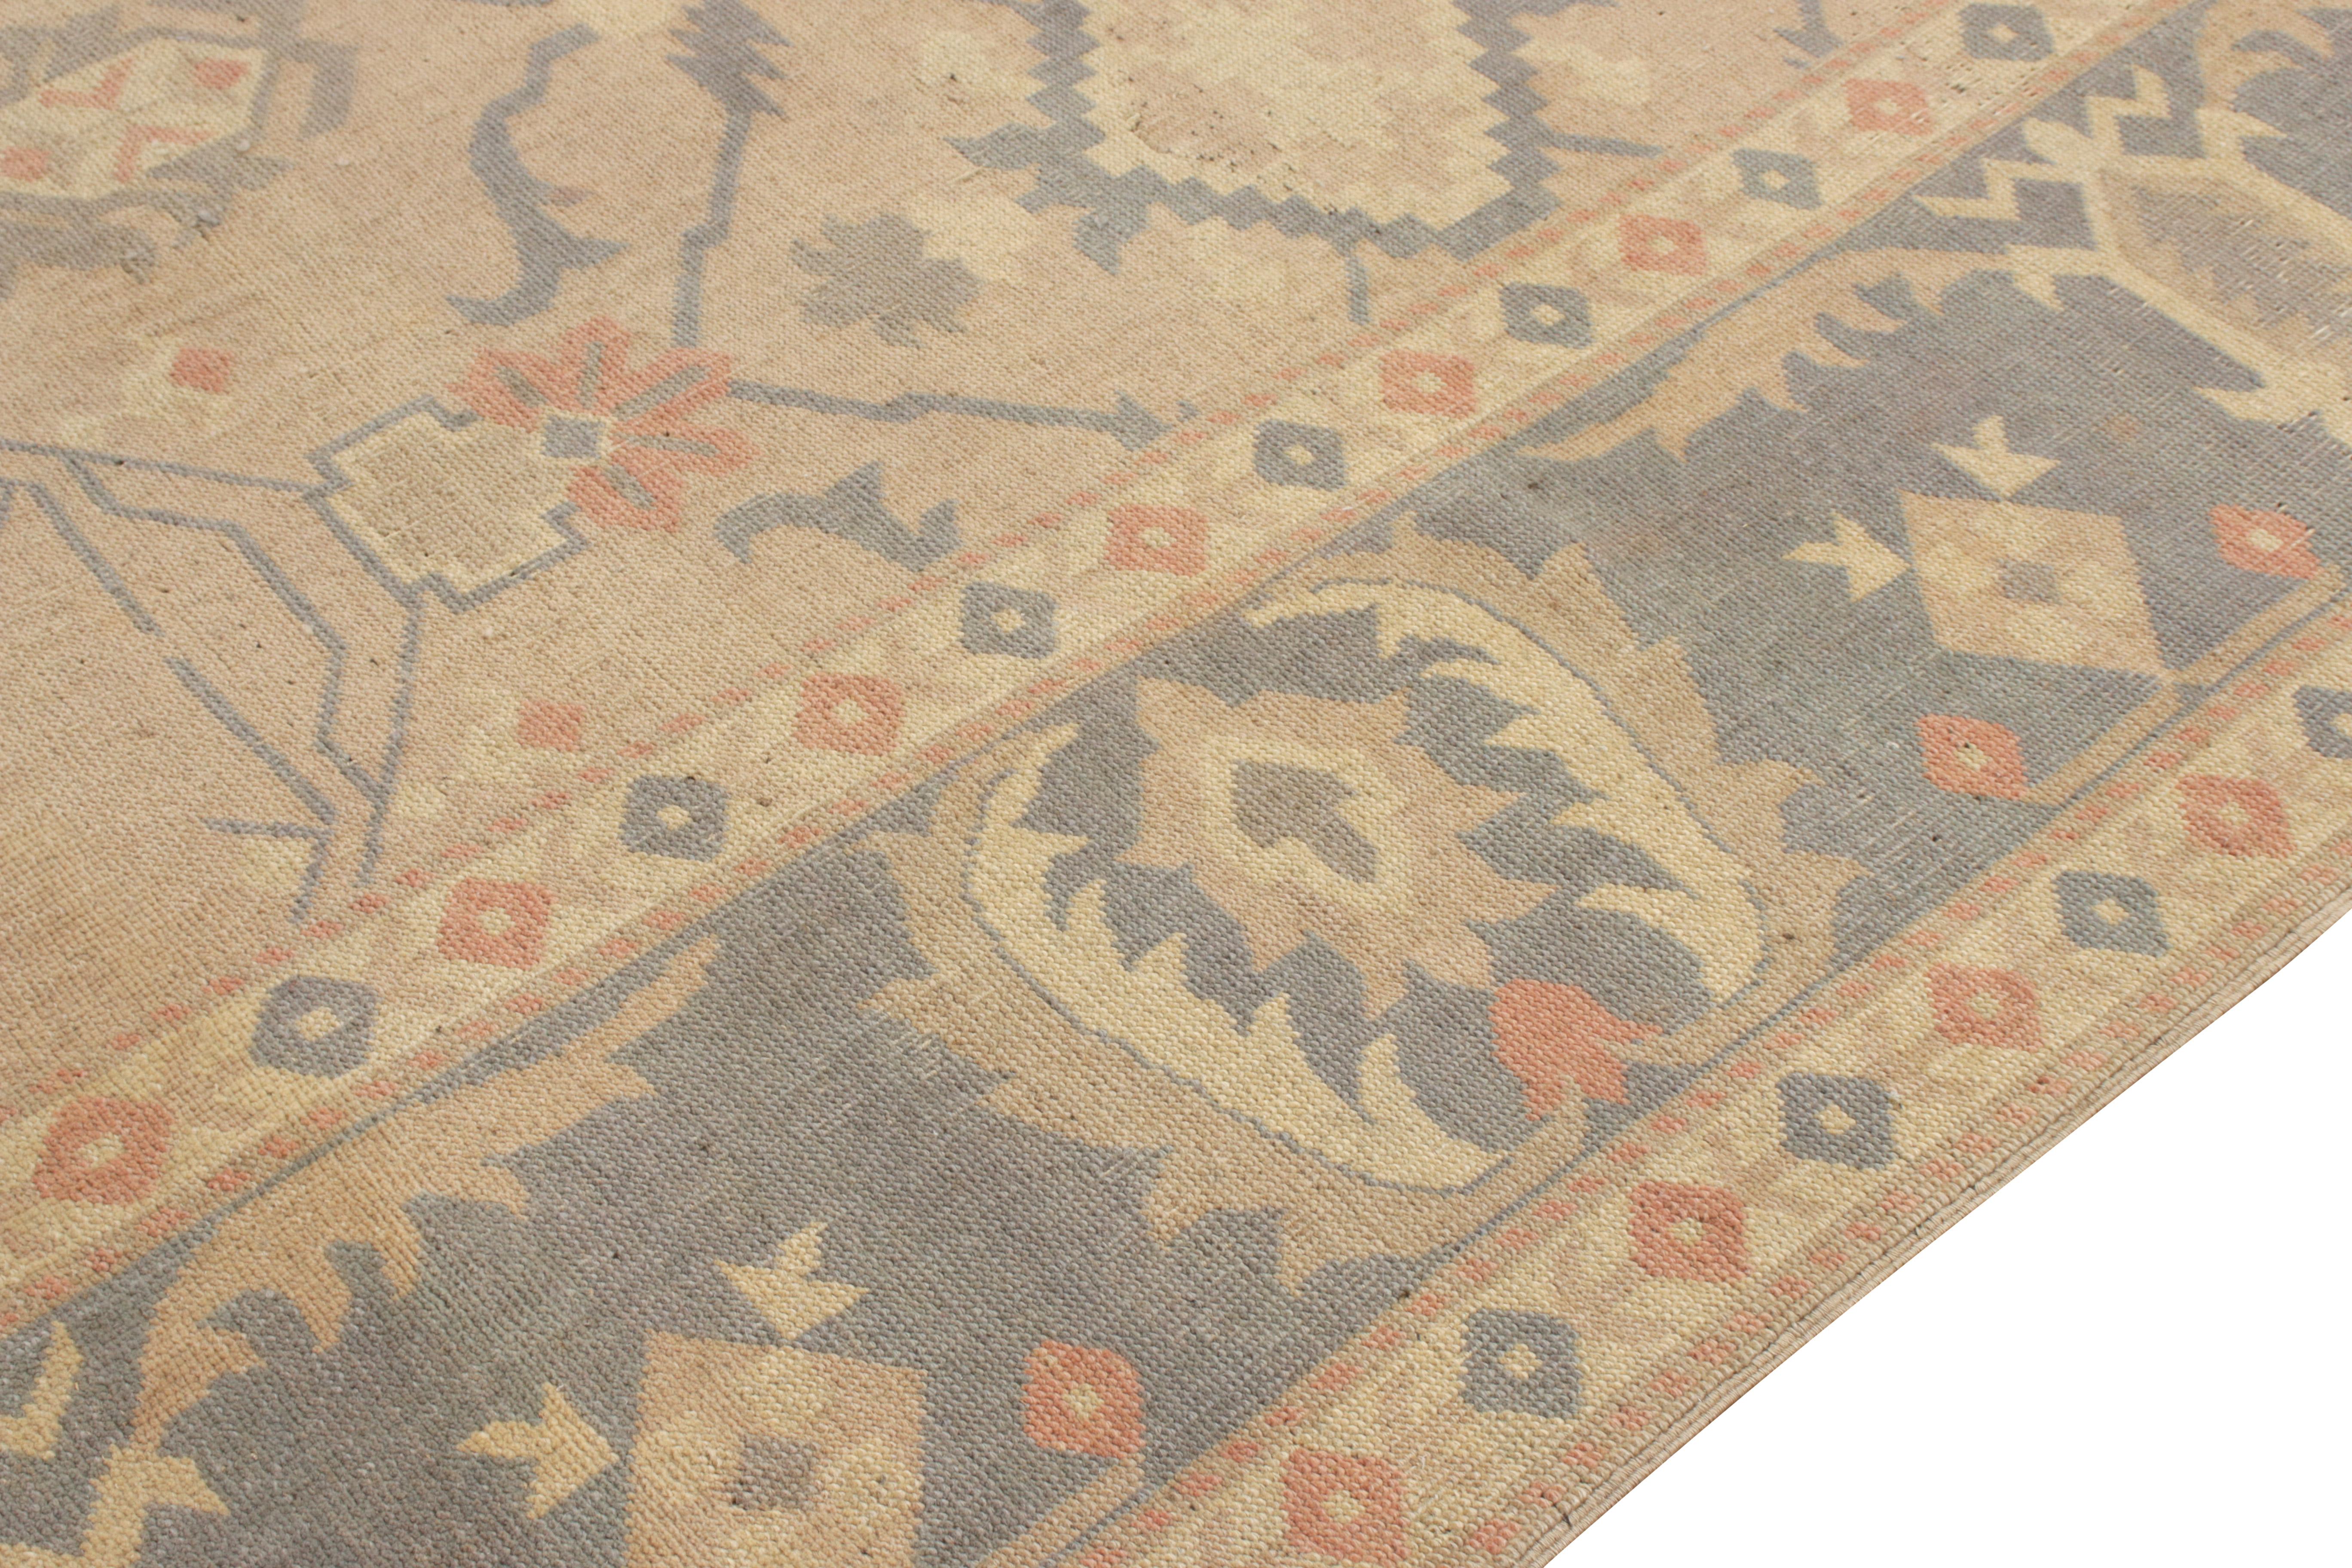 Hand-Knotted Rare Vintage Oushak Rug in Beige-Brown Geometric Floral Pattern by Rug & Kilim